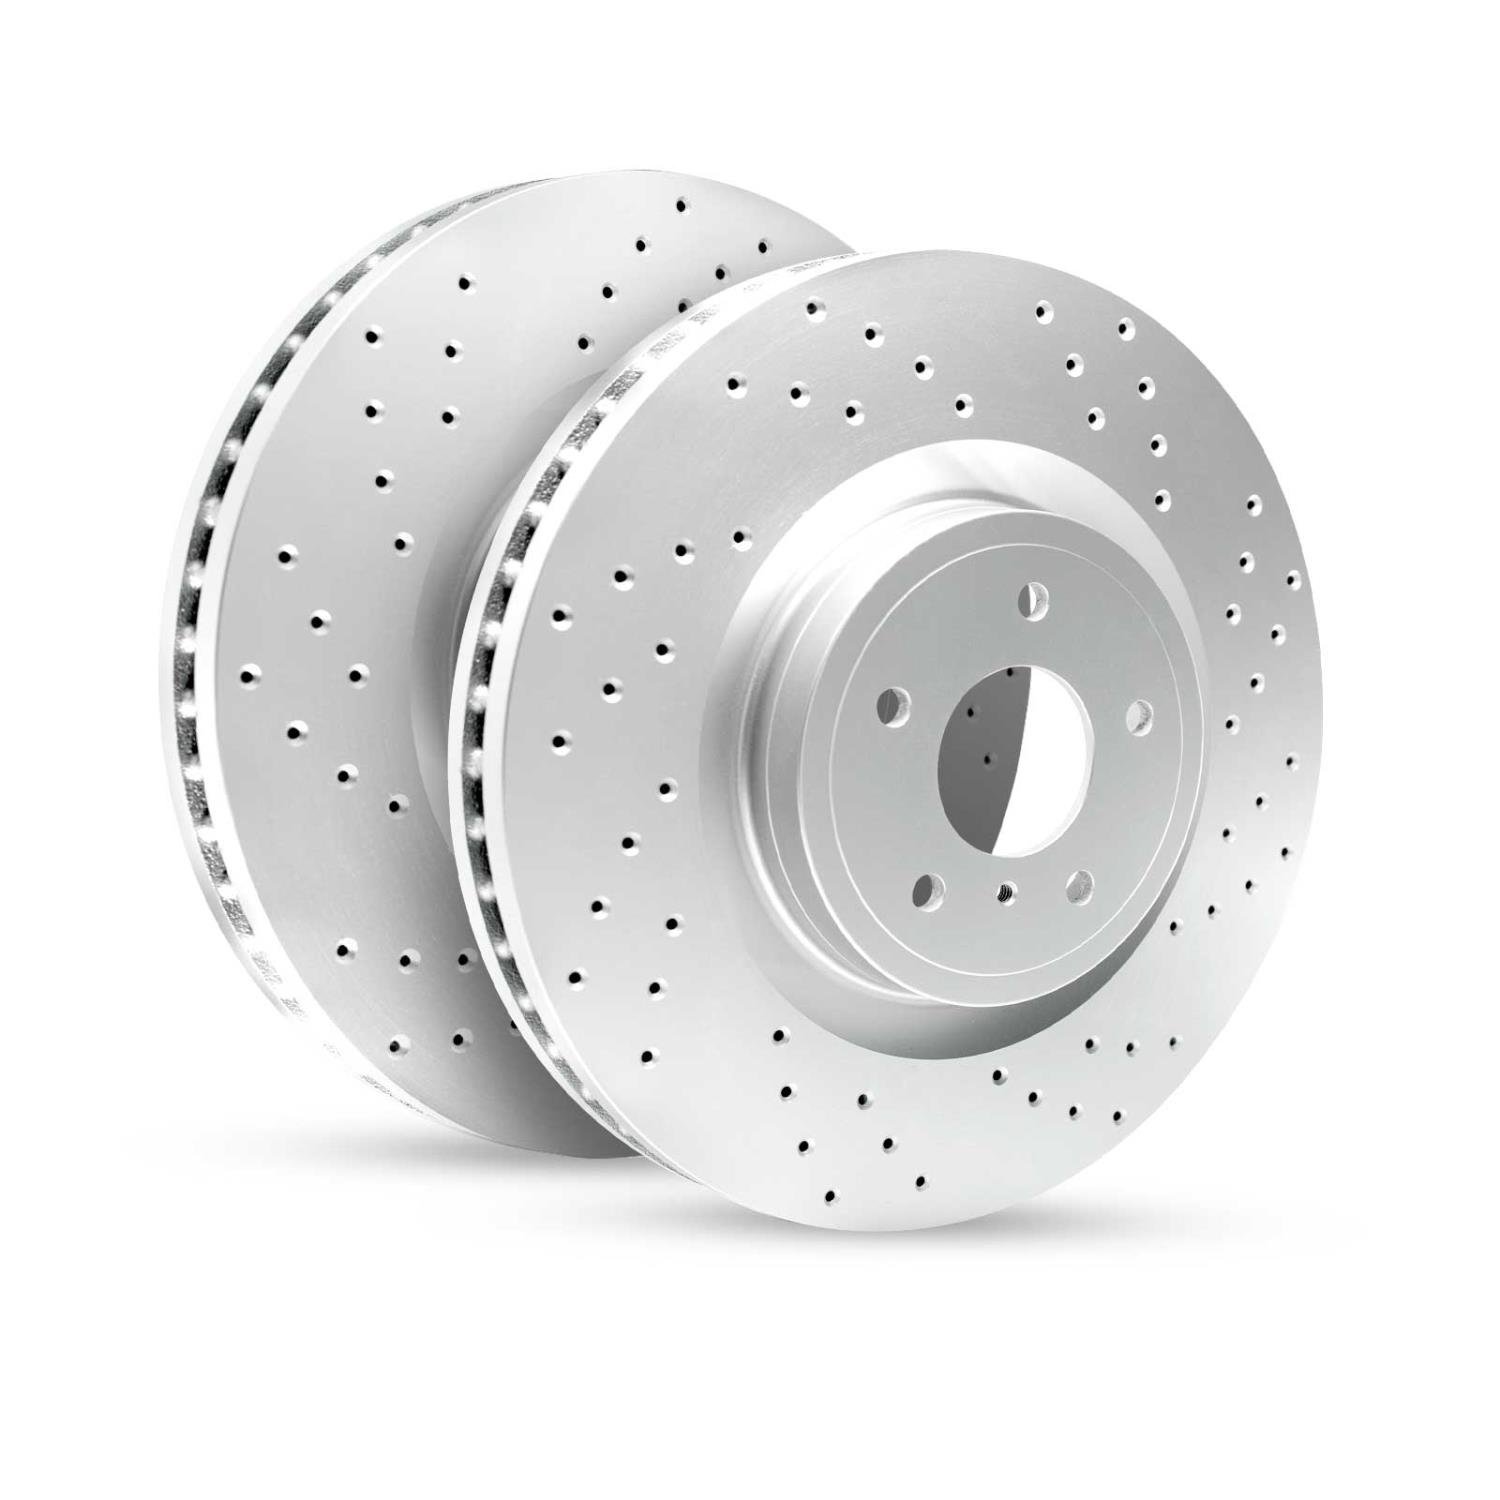 GEO-Carbon Drilled/Slotted Rotors, 2007-2020 Acura/Honda,